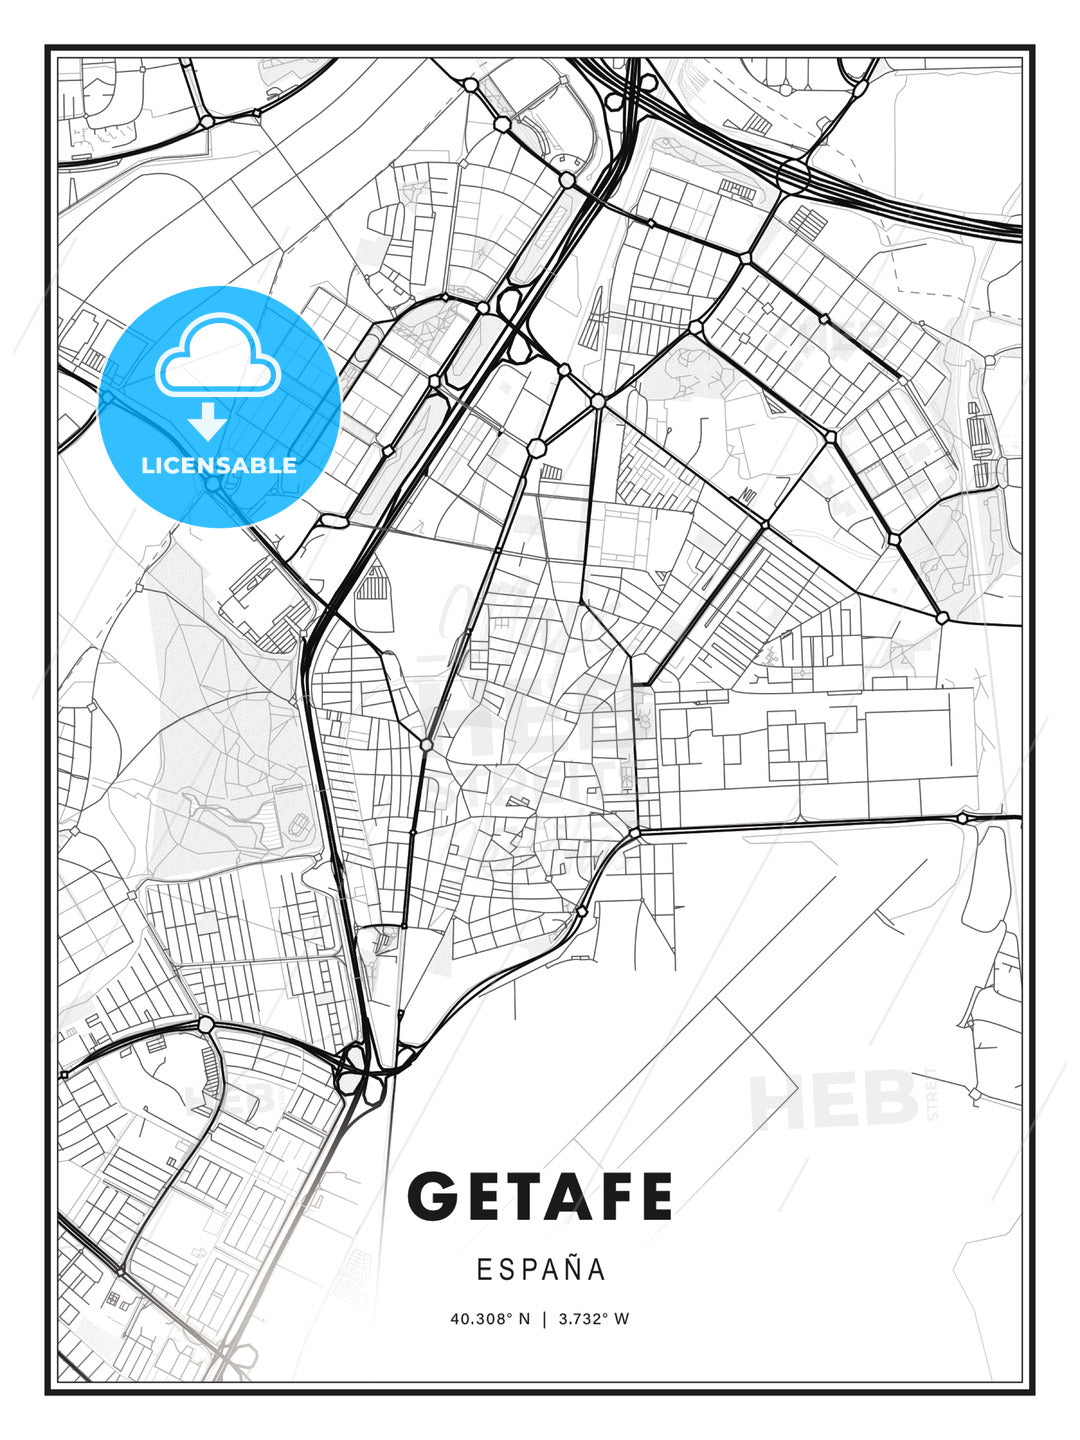 Getafe, Spain, Modern Print Template in Various Formats - HEBSTREITS Sketches